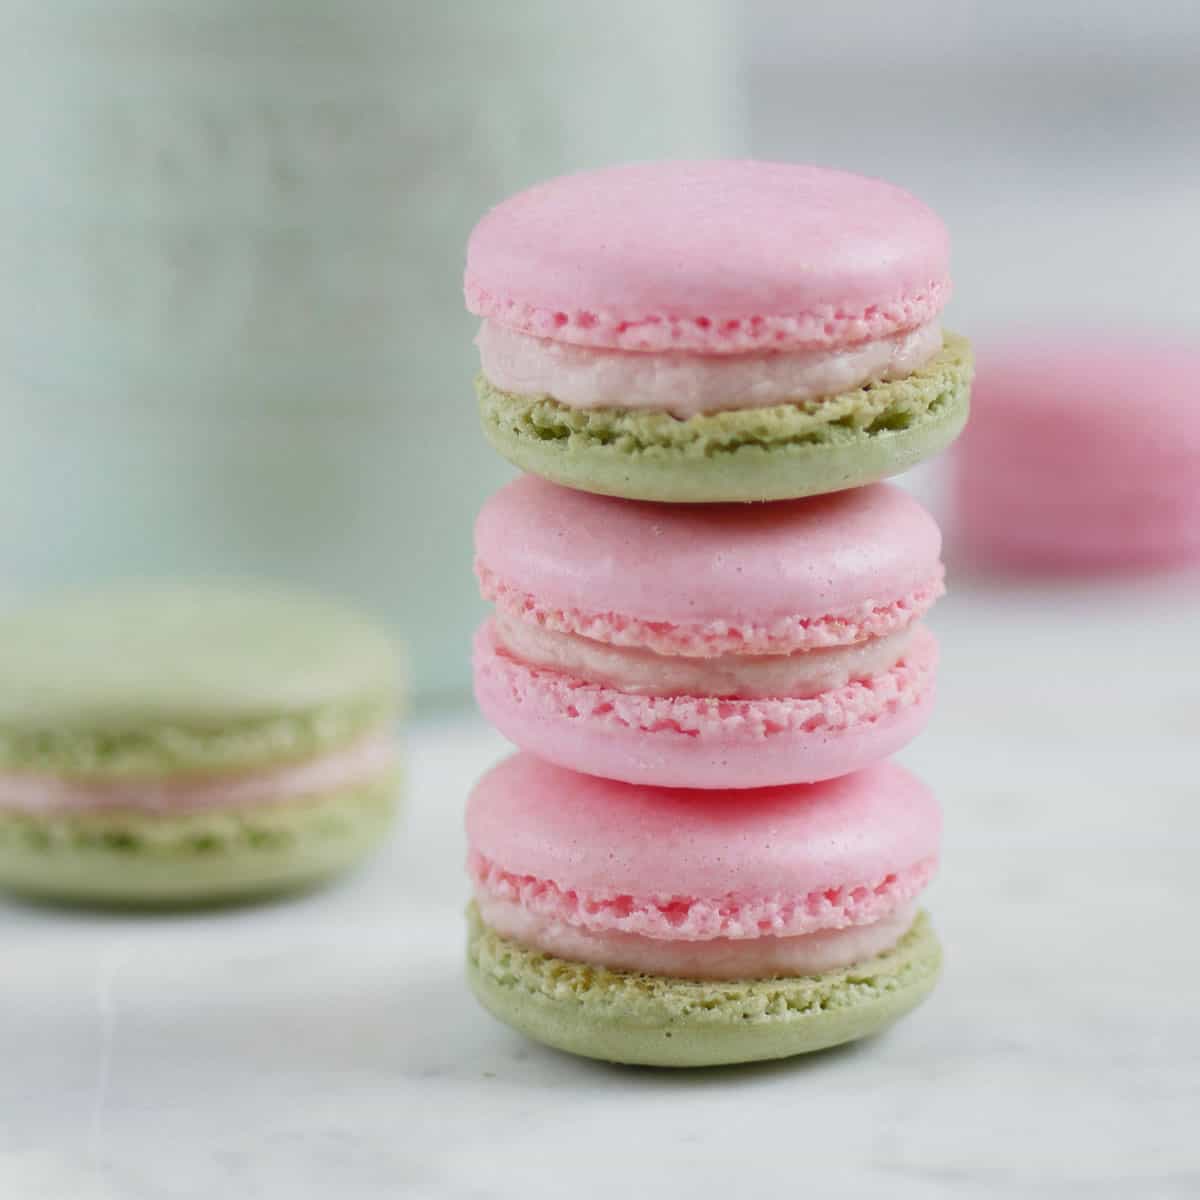 A stack of strawberry basil macarons with green and pink shells in front of a cup of strawberries.